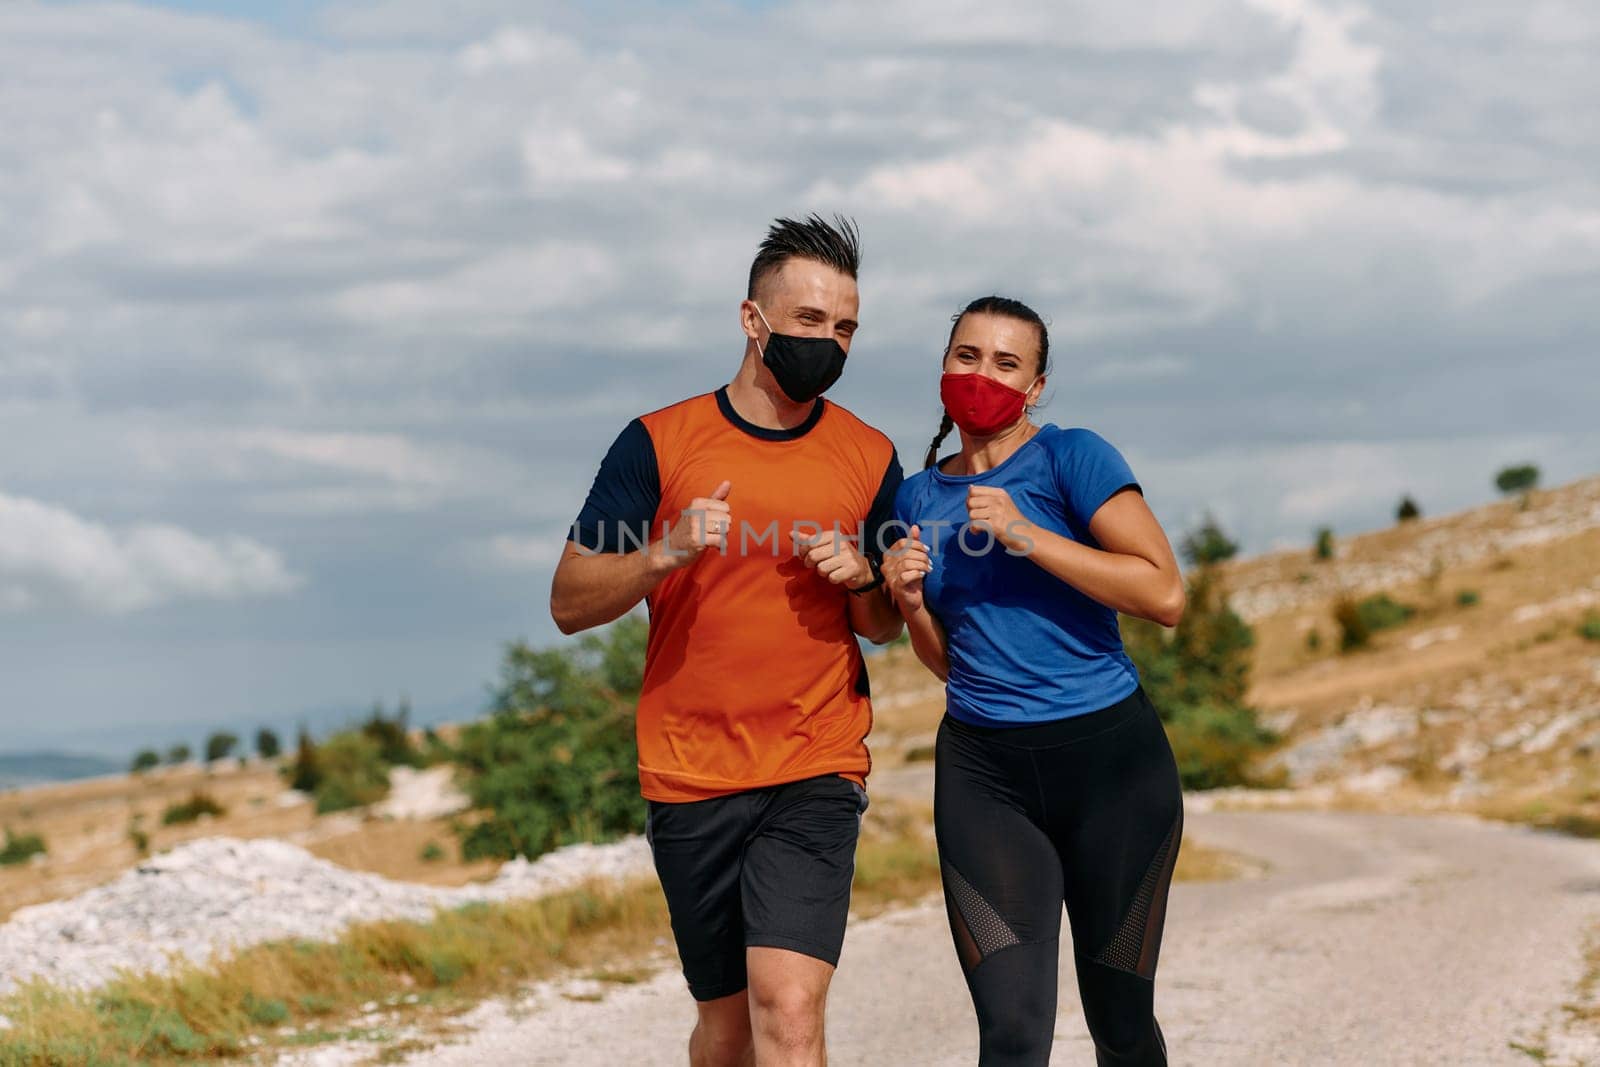 Couple running in nature at morning wearing protective face masks.